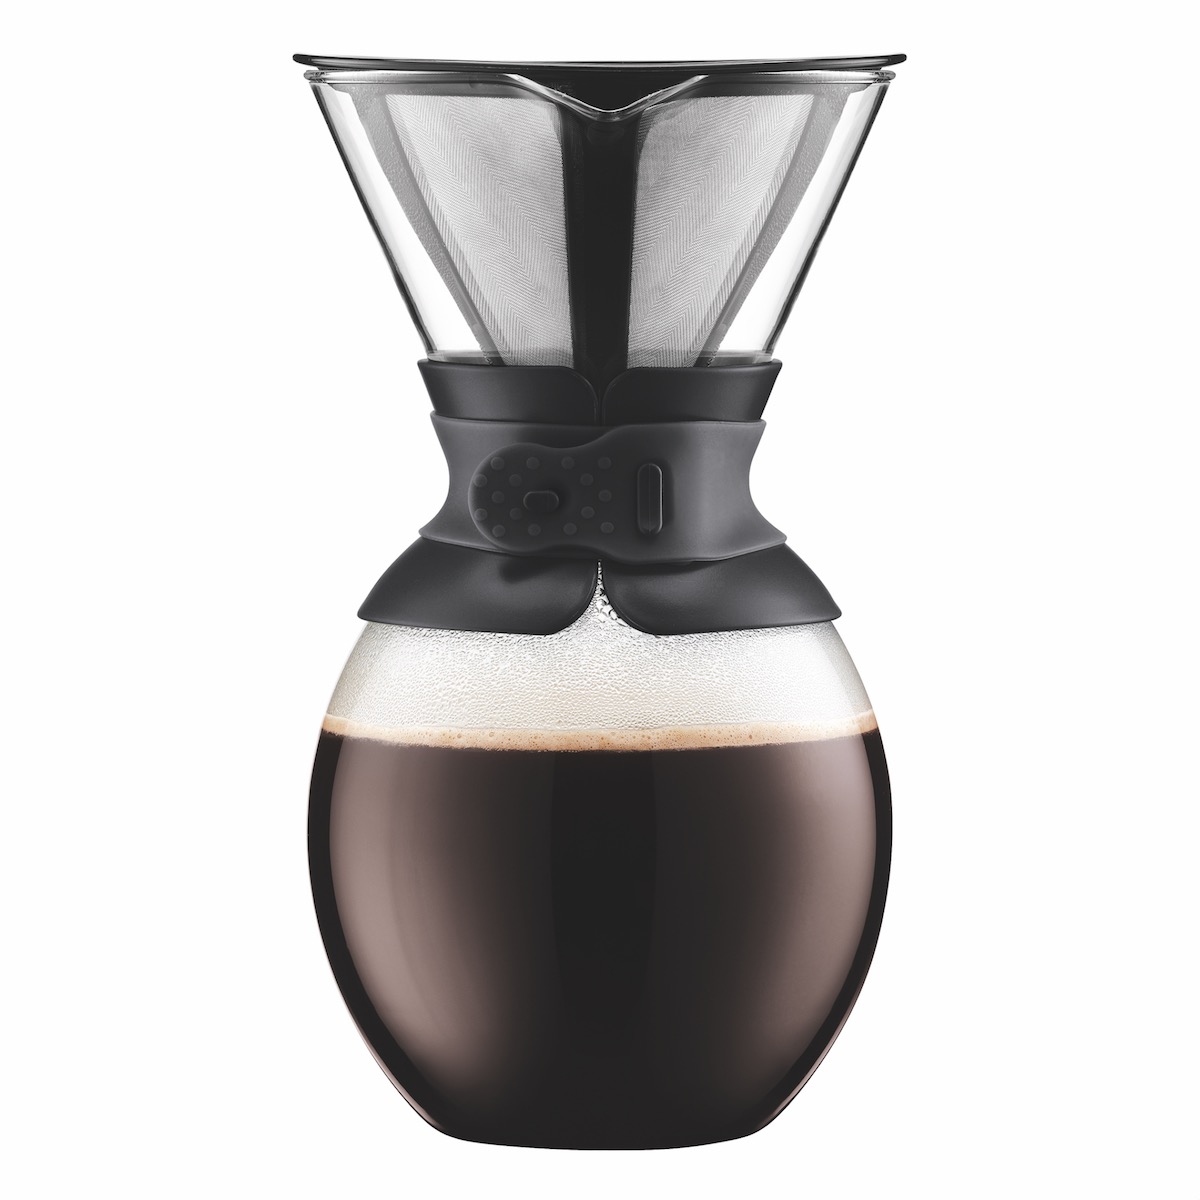 Pour Over Coffee Maker {Walmart Shopping}